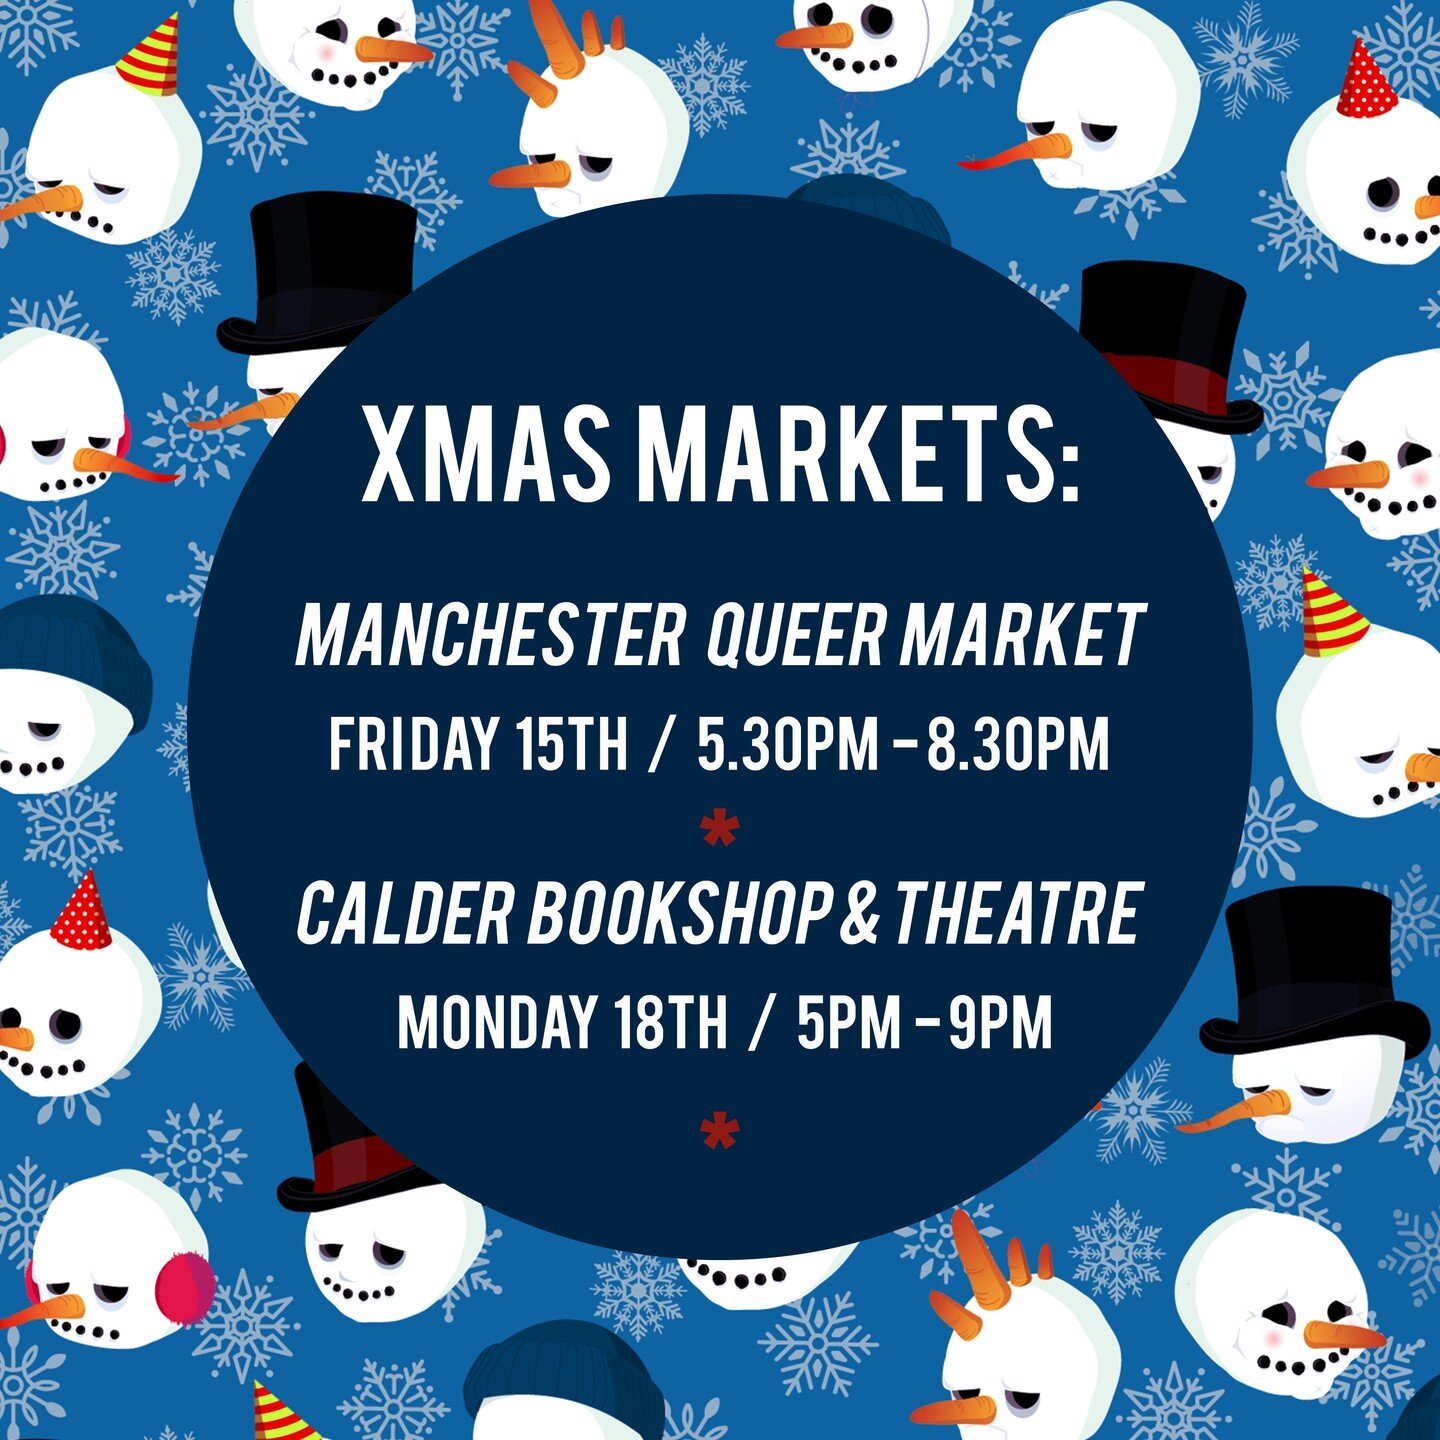 LAST MARKETS OF 2023, PALS!
So ruddy excited for @mcrqueerartmarket tonight taking place @fairfieldsocialclubmcr 
*Irk St, Manchester M4 4JT
*TODAY - from 5.30PM

AND
PUMPED for @calderbookshop winter market!
*51 The Cut, London SE1 8LF
*Monday 18th 